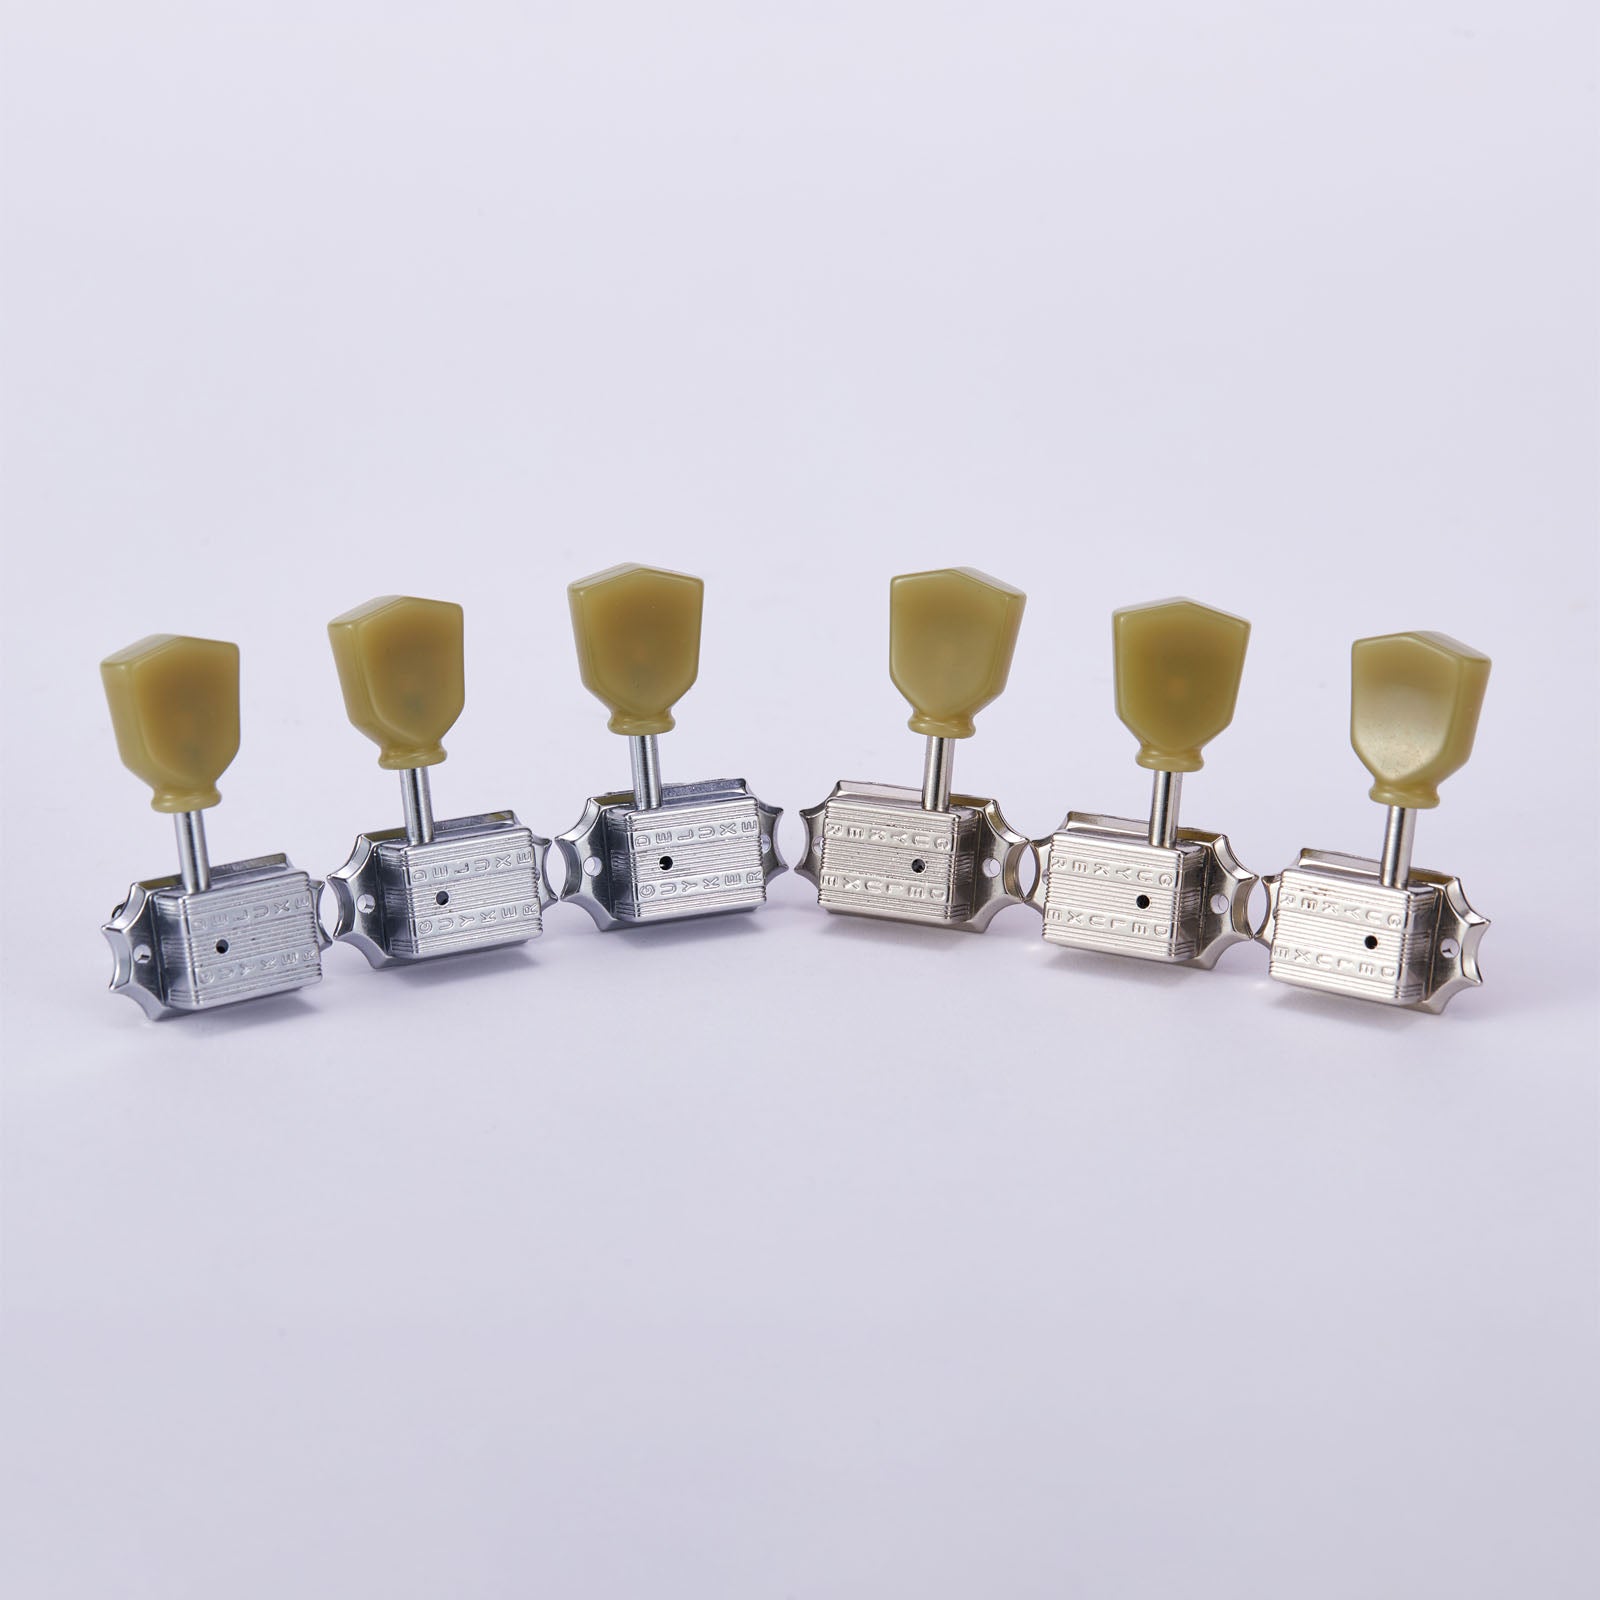 GUYKER GK-135SP Tuning Pegs Deluxe Vintage Style